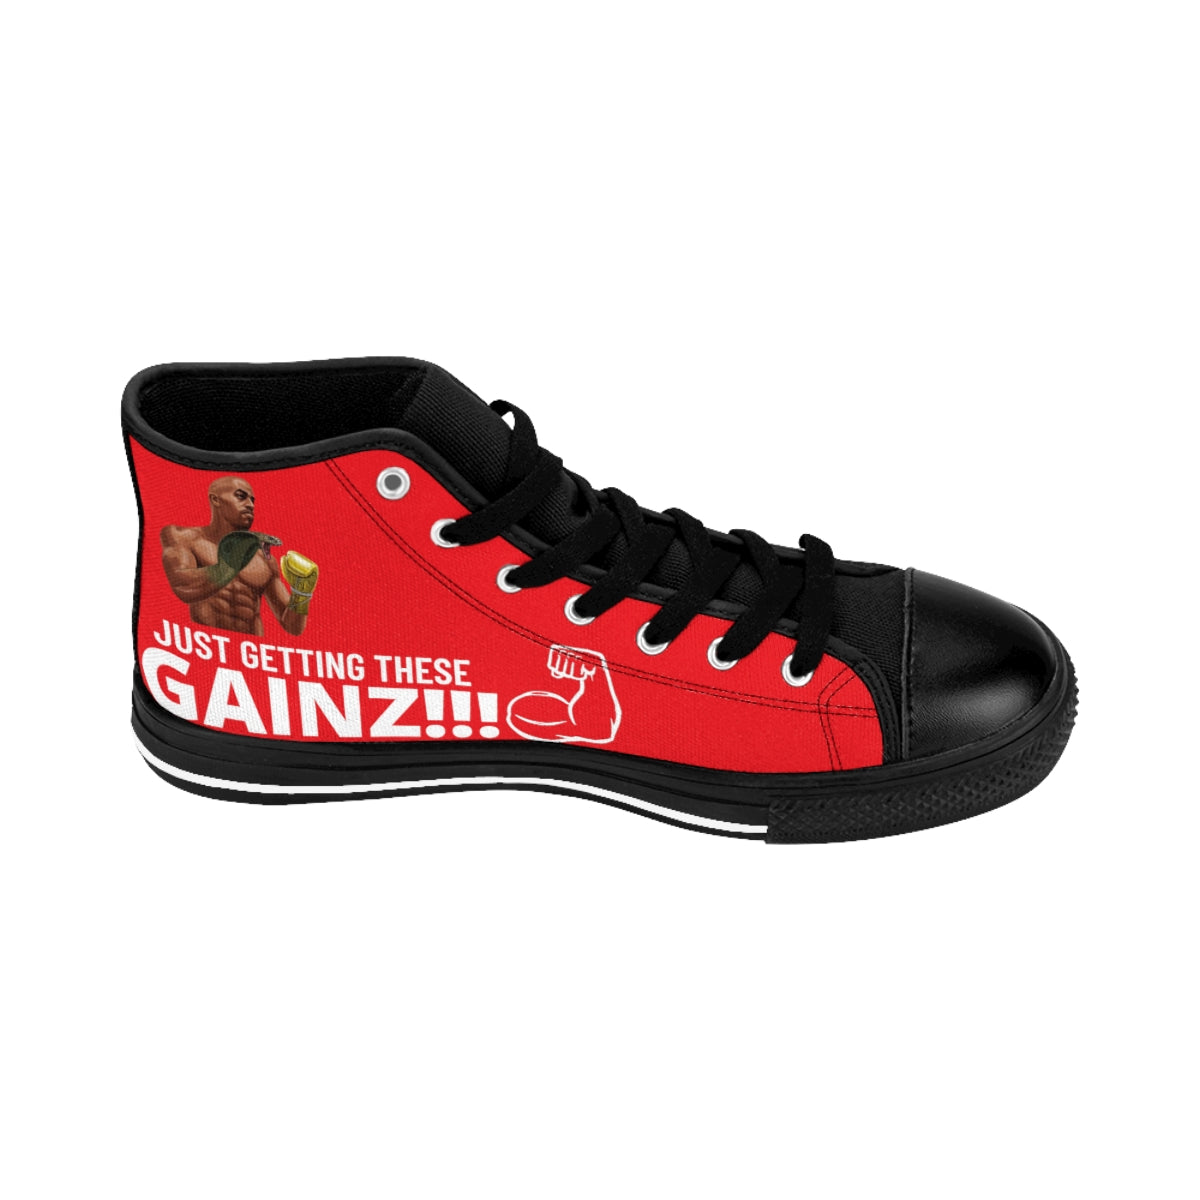 Red Women's High-top Sneakers (logo only)